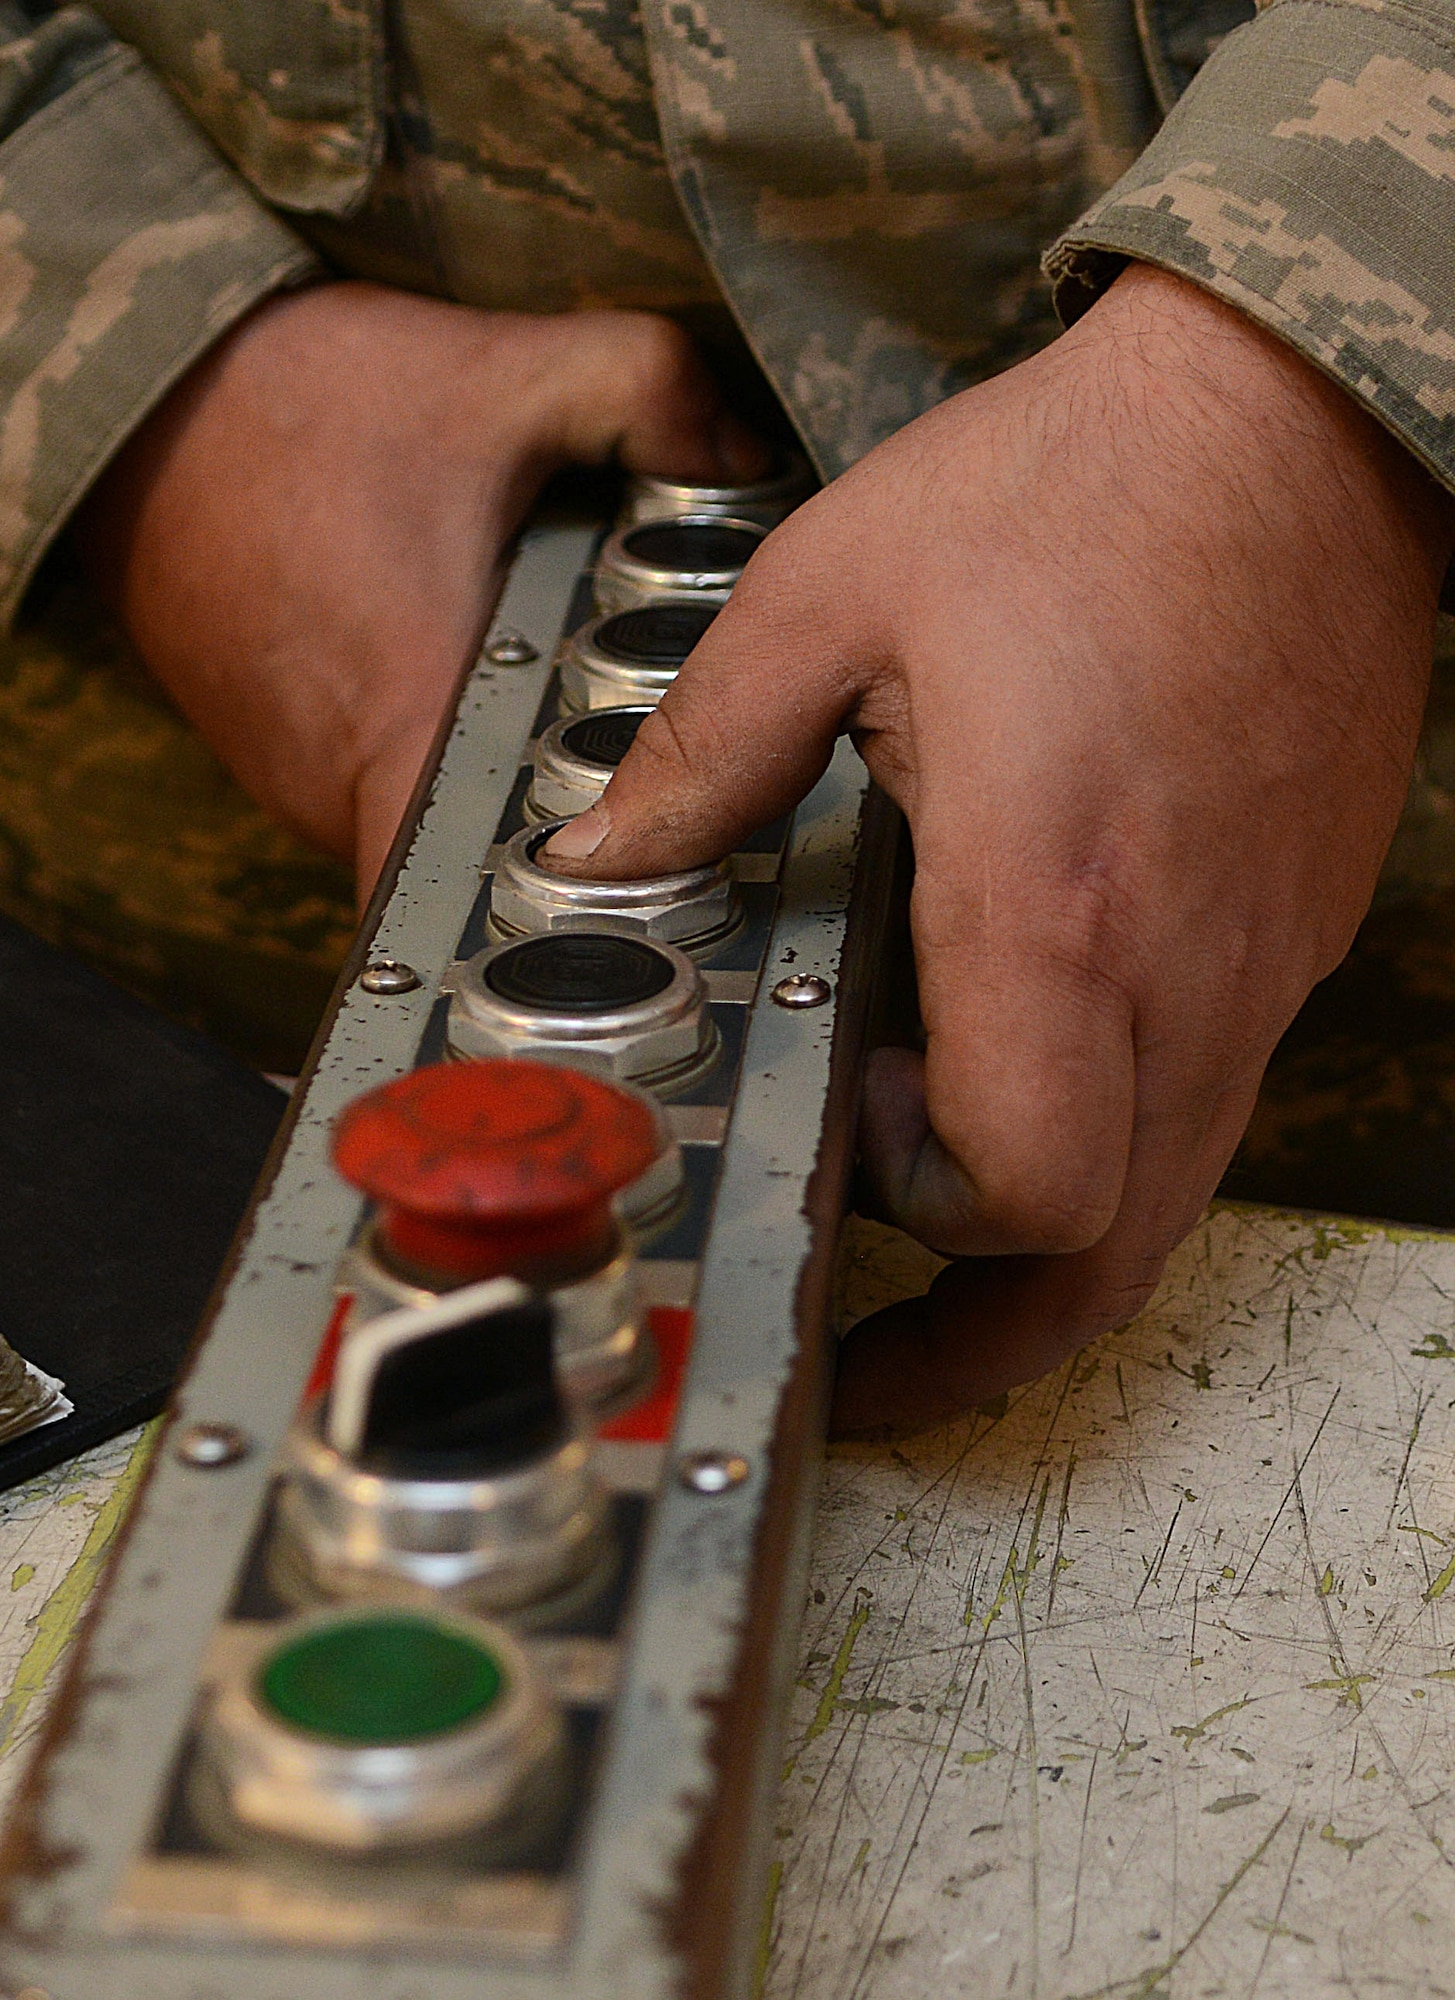 A member of the 91st Missile Maintenance Squadron missile maintenance team tests a hoist pendant at Minot Air Force Base, N.D., May 30, 2017. To prepare for Global Strike Challenge 2017, the five-member maintenance team inspected and tested various components of a payload transporter. (U.S. Air Force photo/Airman 1st Class Jonathan McElderry)